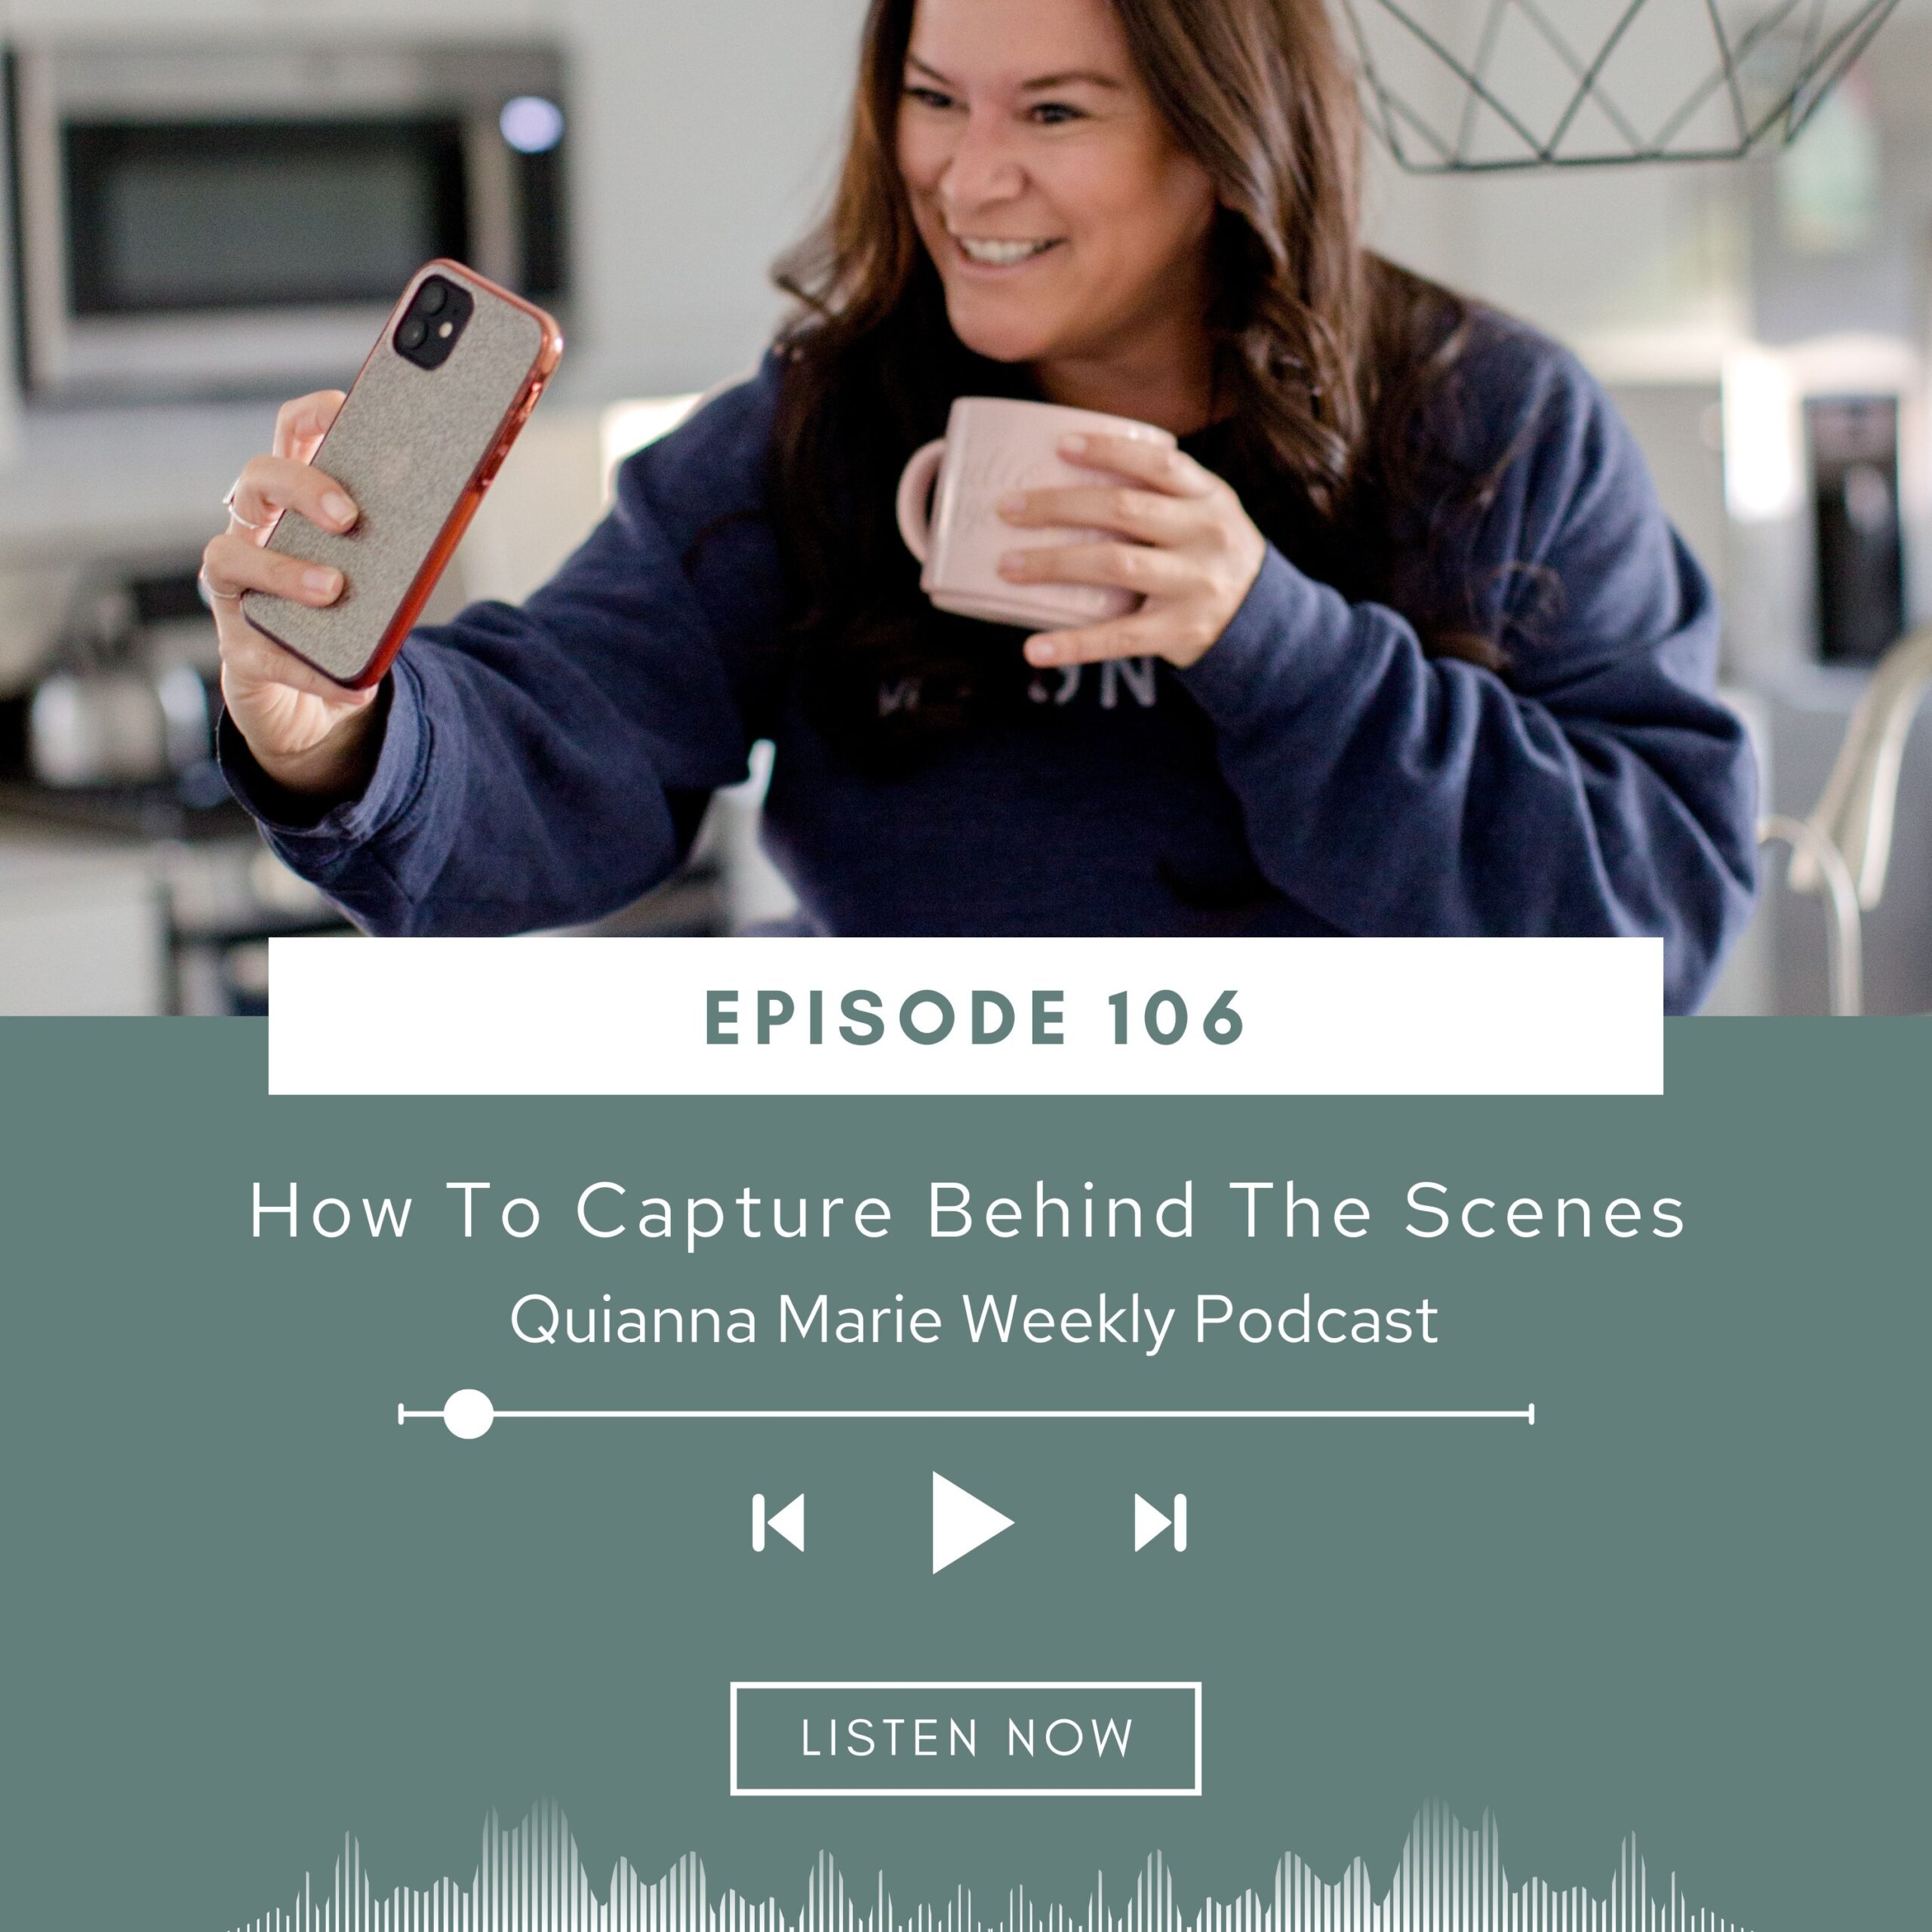 New podcast episode for photographers - How To Capture Behind The Scenes with Quianna Marie